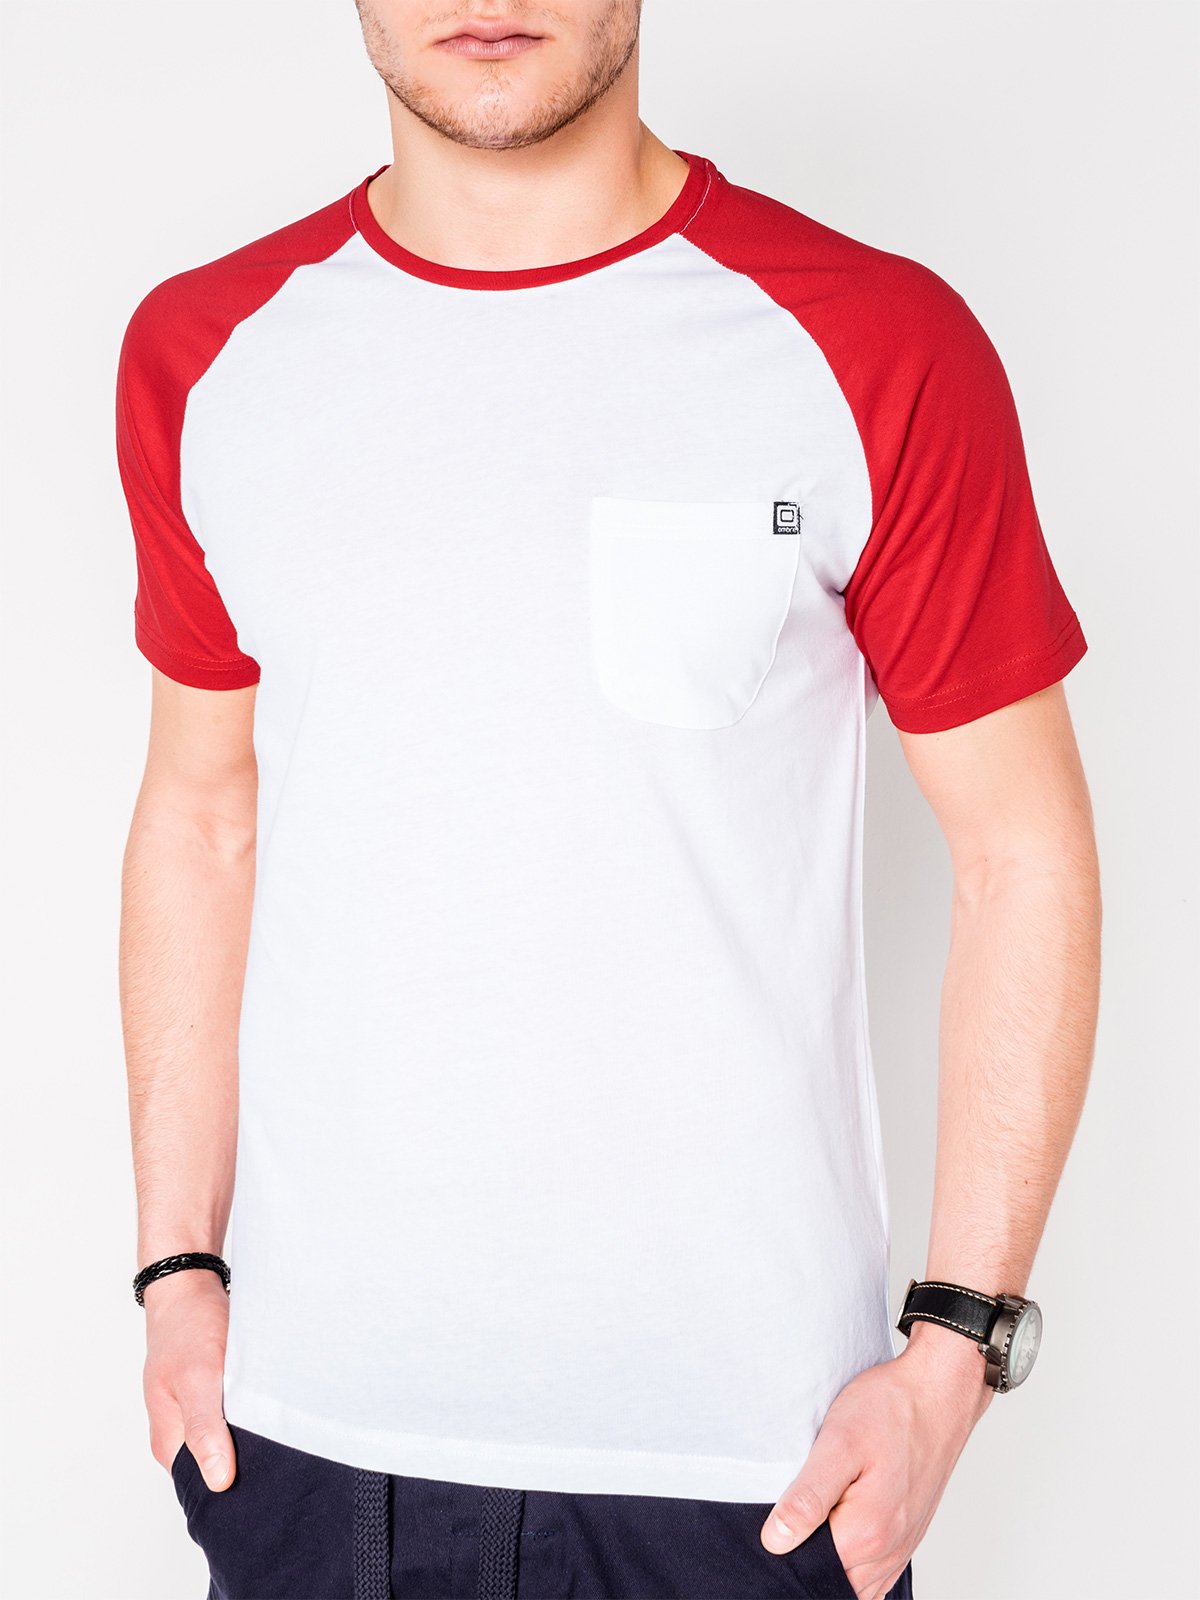 white and red shirt mens